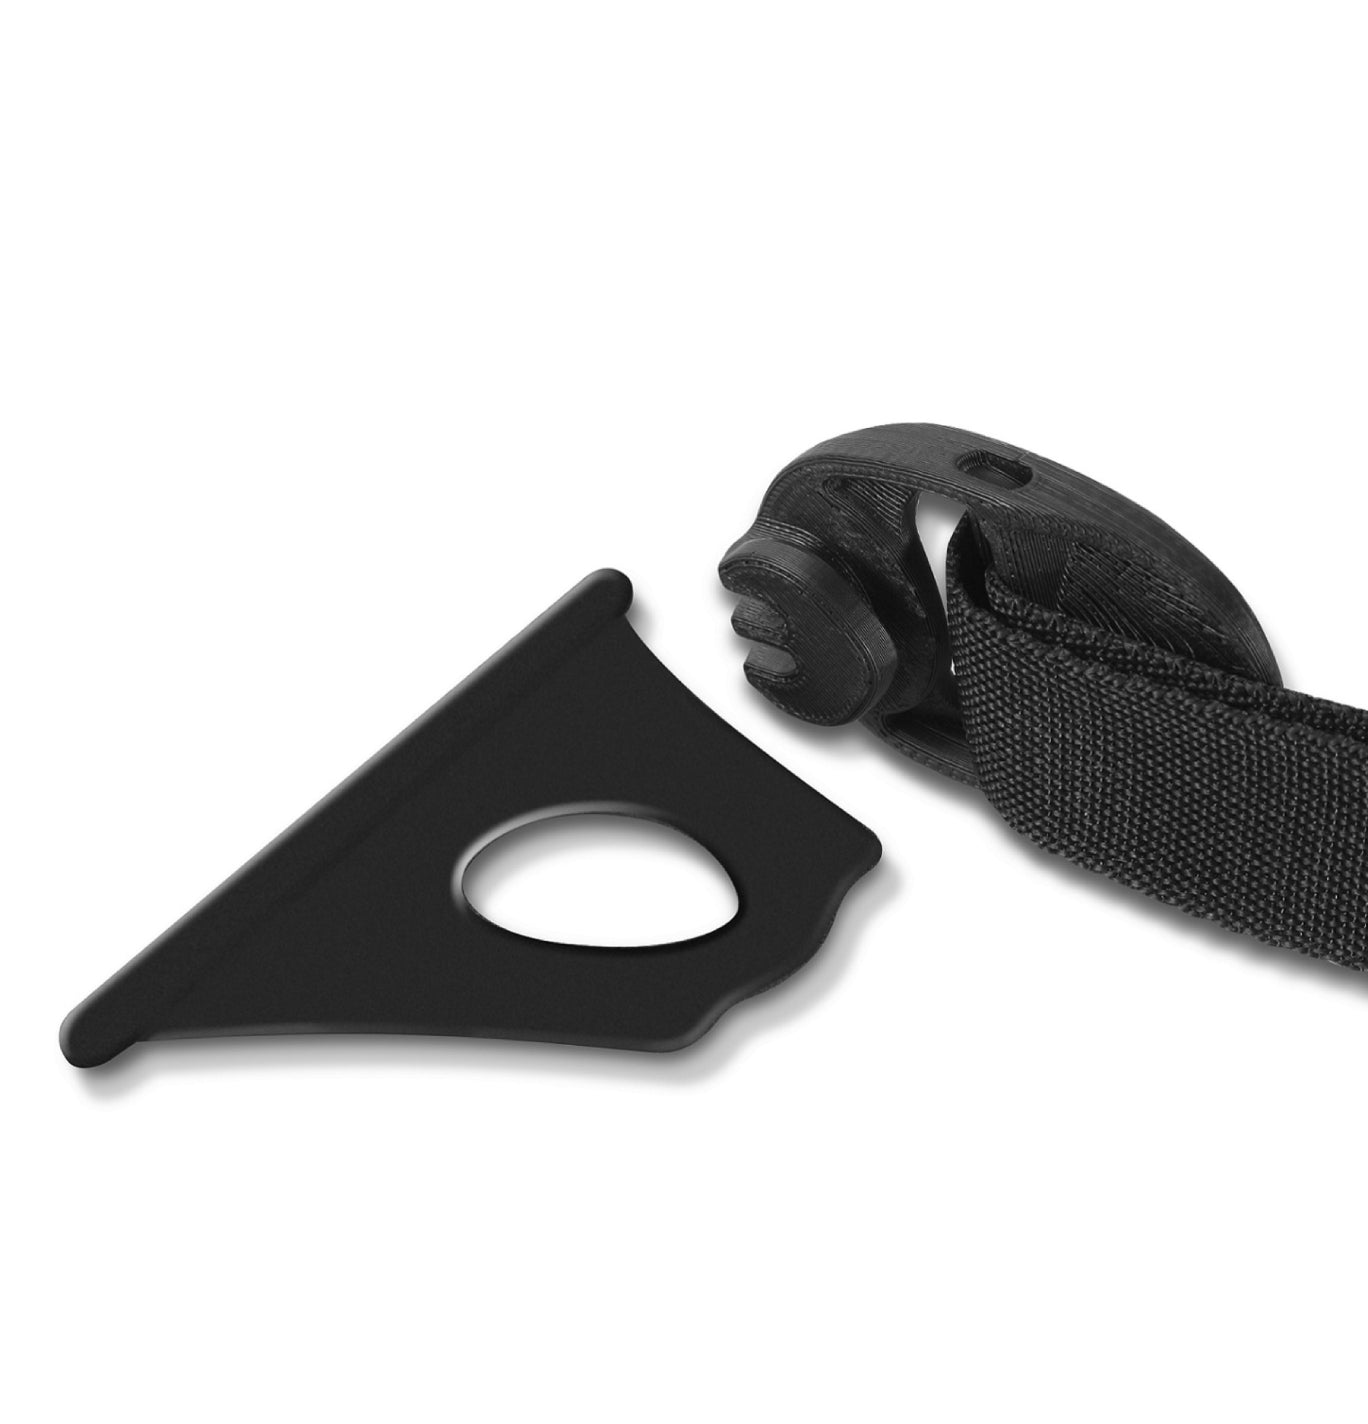 Thule Strap Kit for Storage Organisers